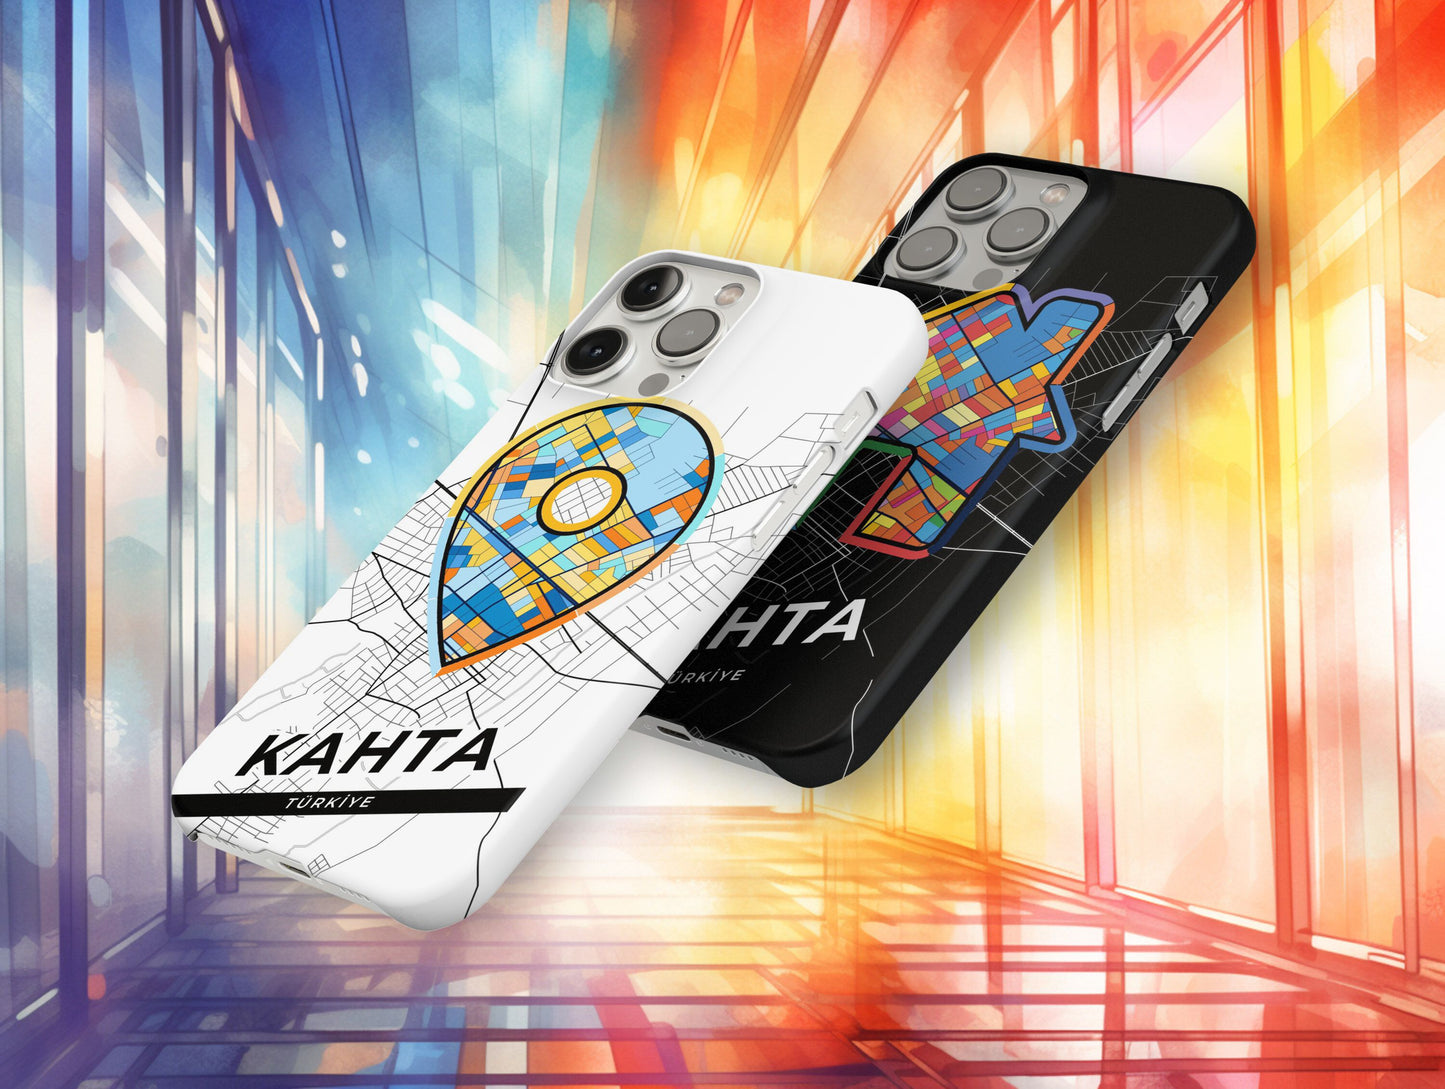 Kahta Turkey slim phone case with colorful icon. Birthday, wedding or housewarming gift. Couple match cases.